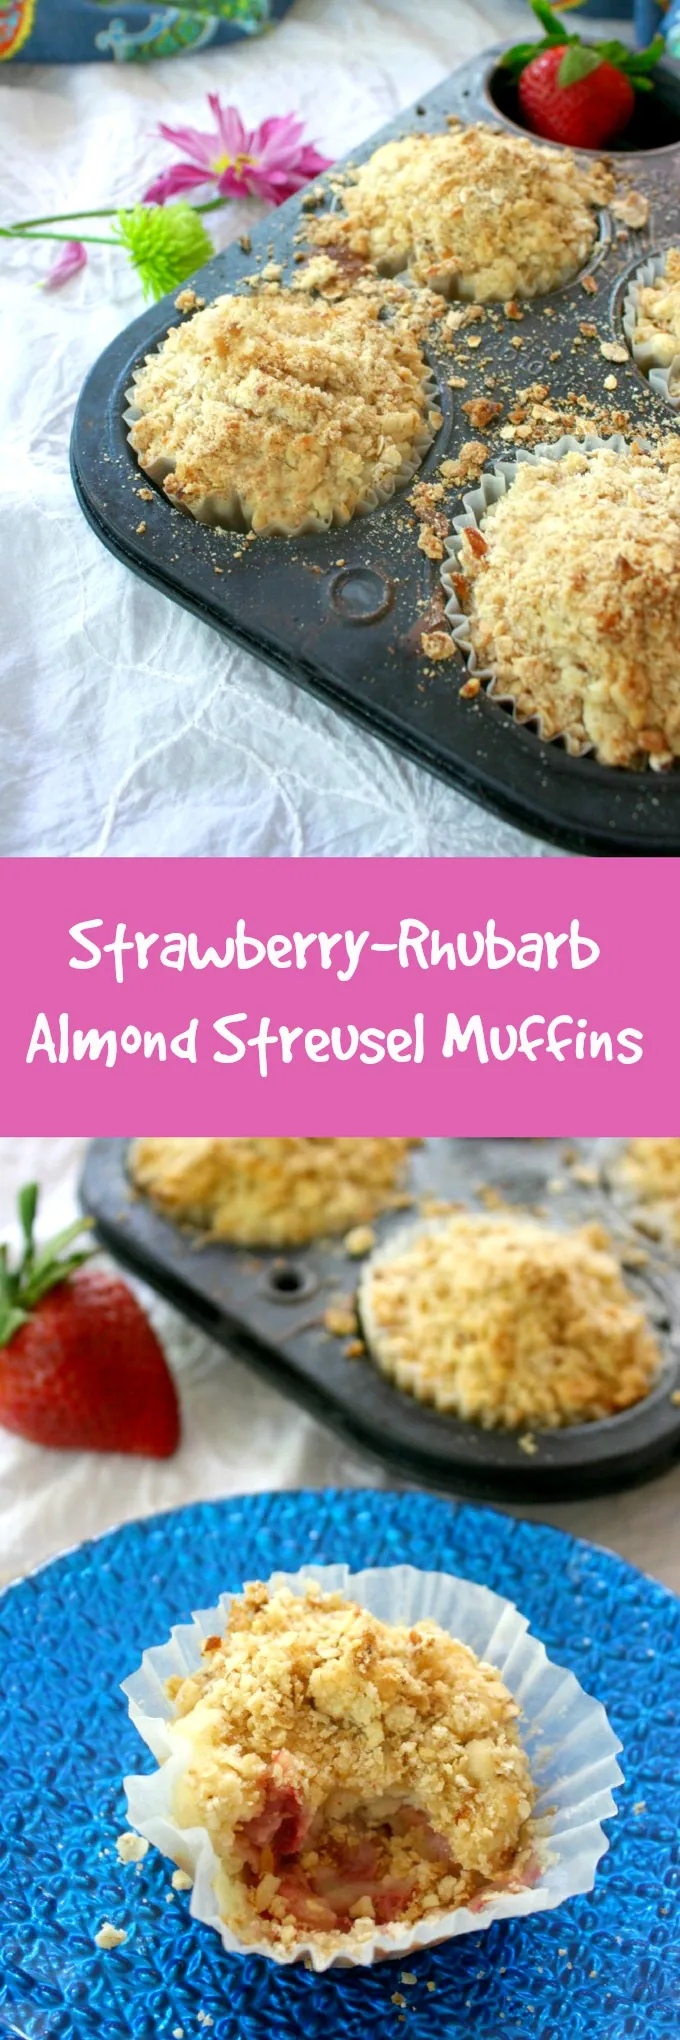 Strawberry-Rhubarb Almond Streusel Muffins are perfect this time of year. Fresh rhubarb won't be around long, so make them while you can.